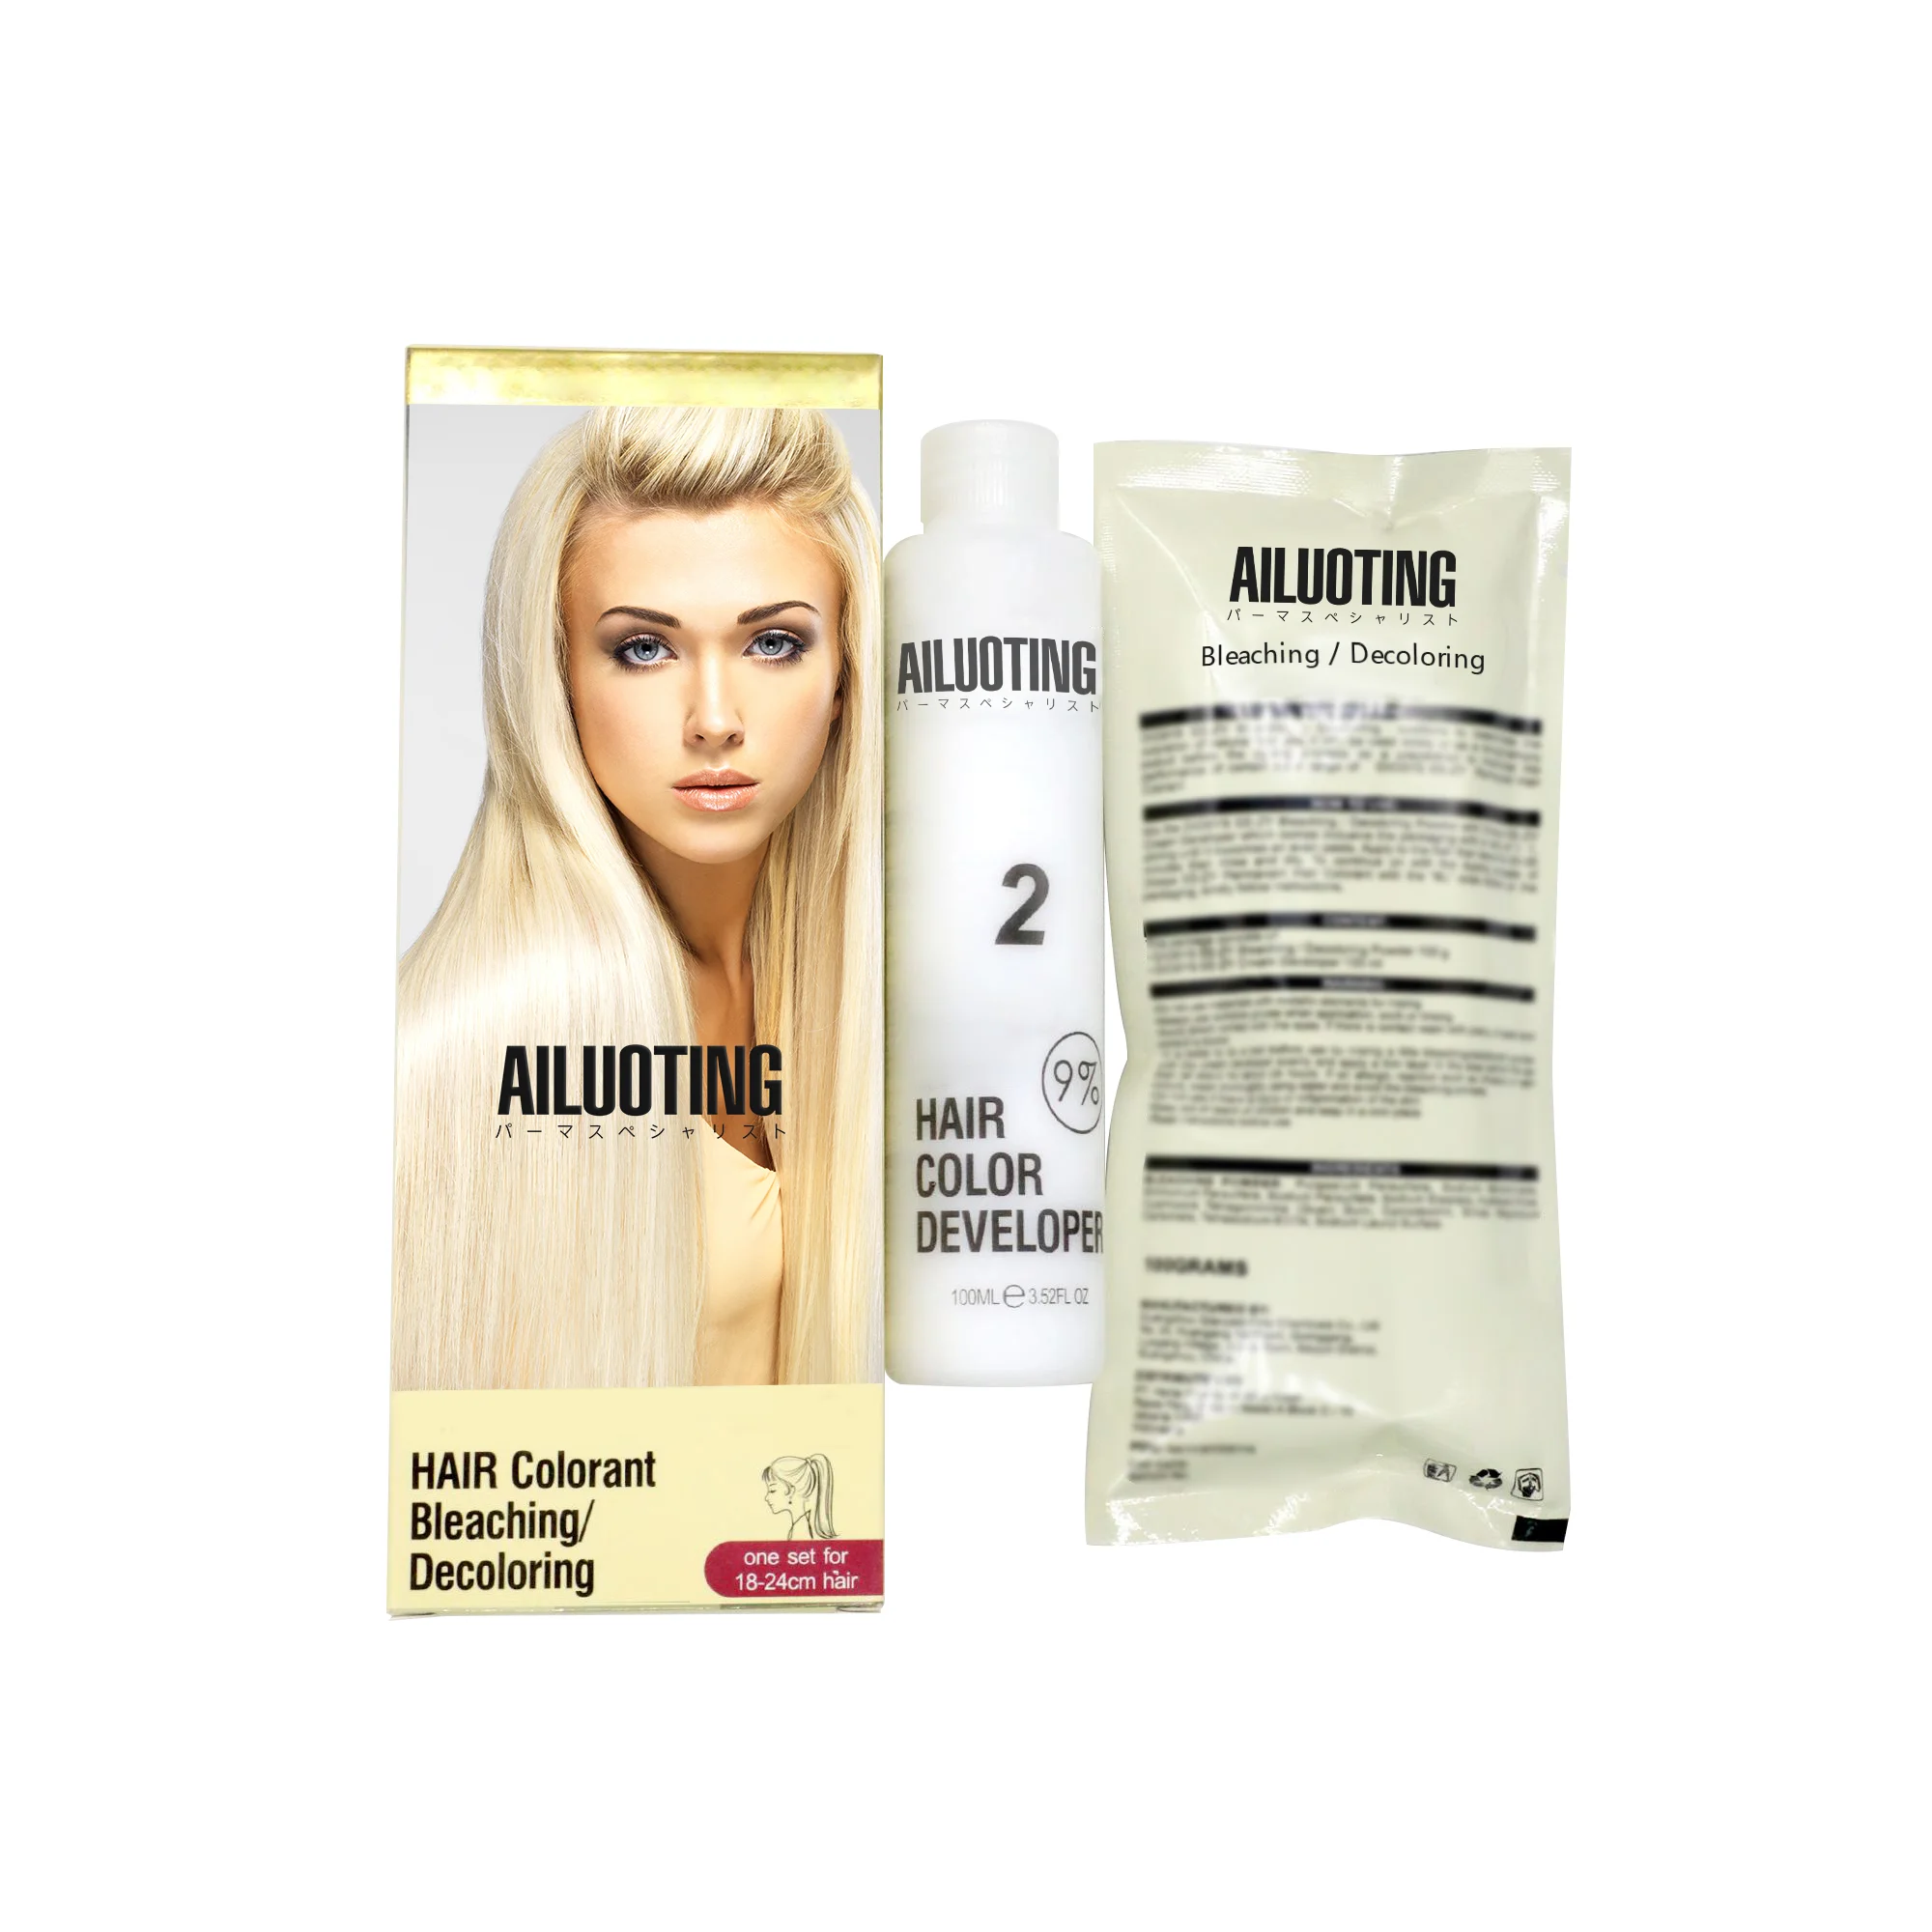 Oem Private Label Hair Bleaching Cream Decolor Products Lightening Cream Hair  Bleach Cream - Buy Hair Bleach Cream,Bleach Powder,Private Label Hair  Developer Product on 